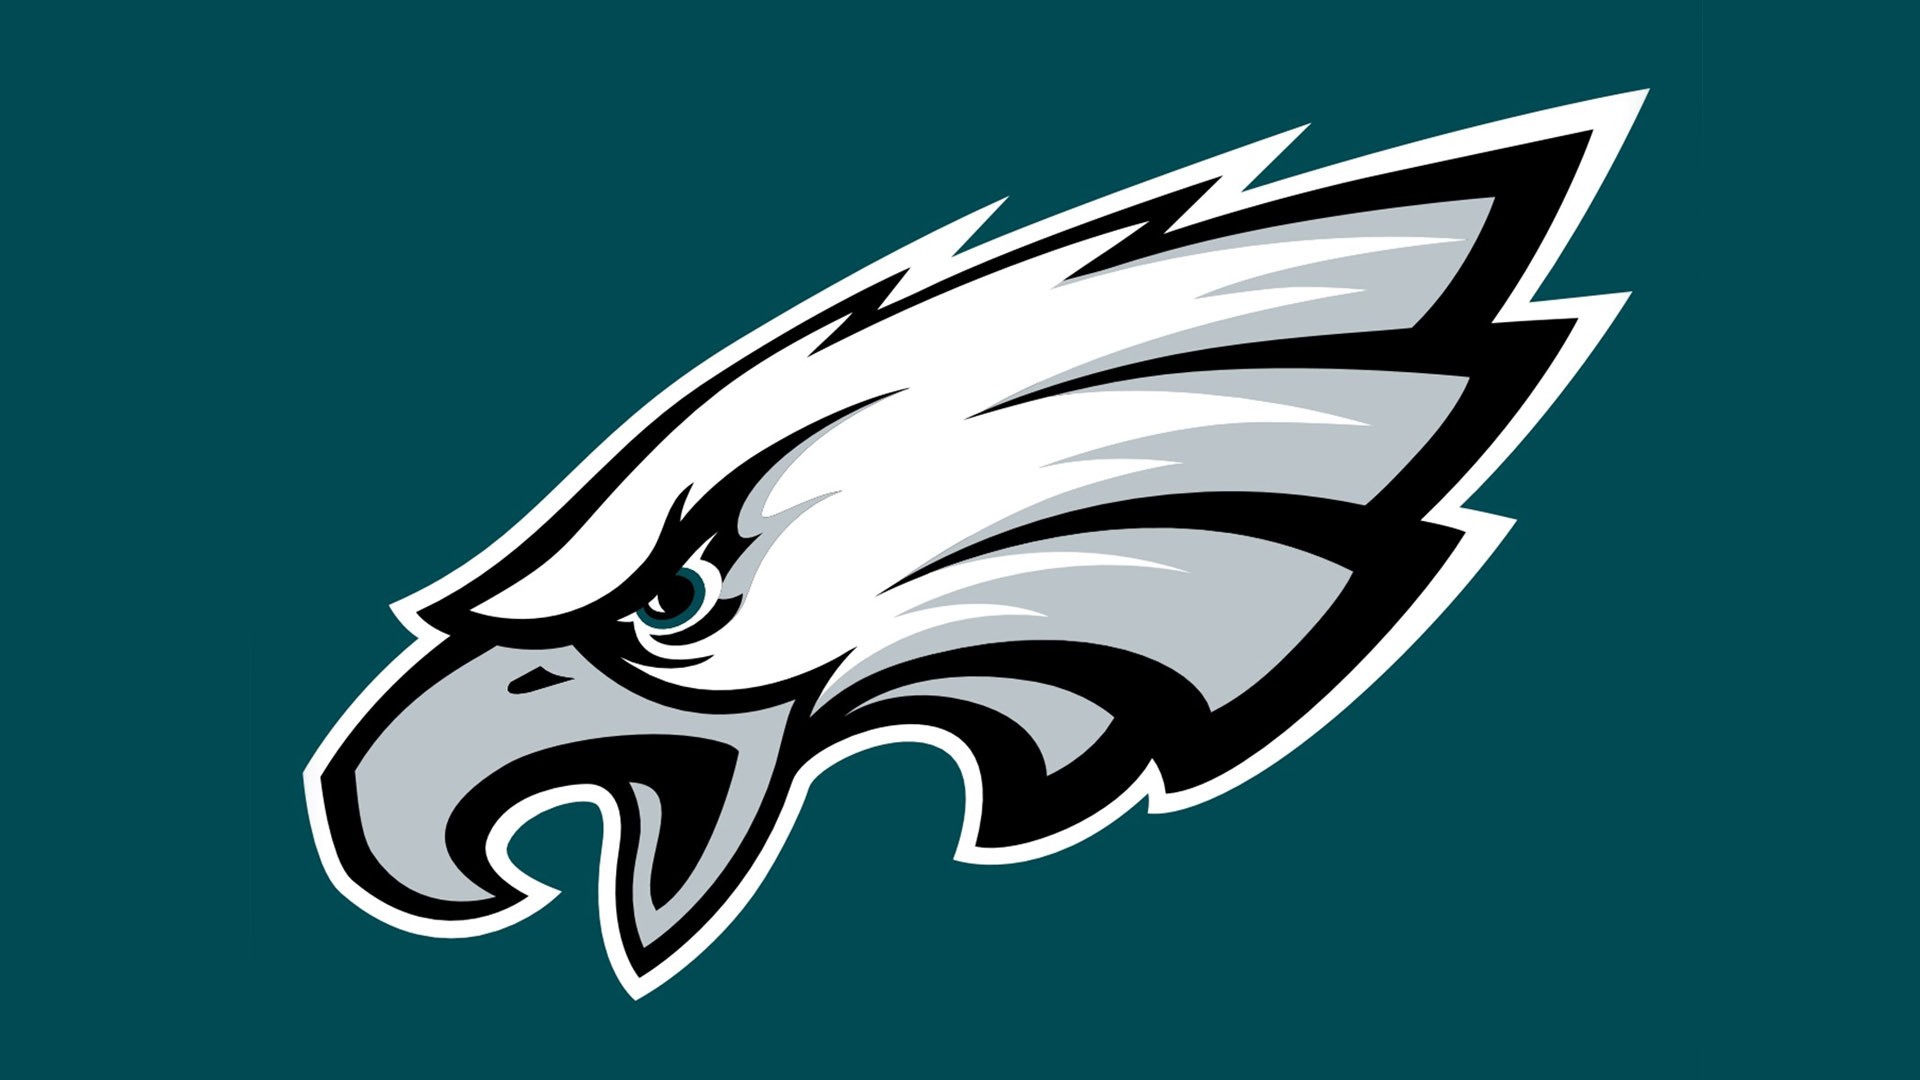 Wallpaper Desktop Phila Eagles HD with resolution 1920x1080 pixel. You can make this wallpaper for your Mac or Windows Desktop Background, iPhone, Android or Tablet and another Smartphone device